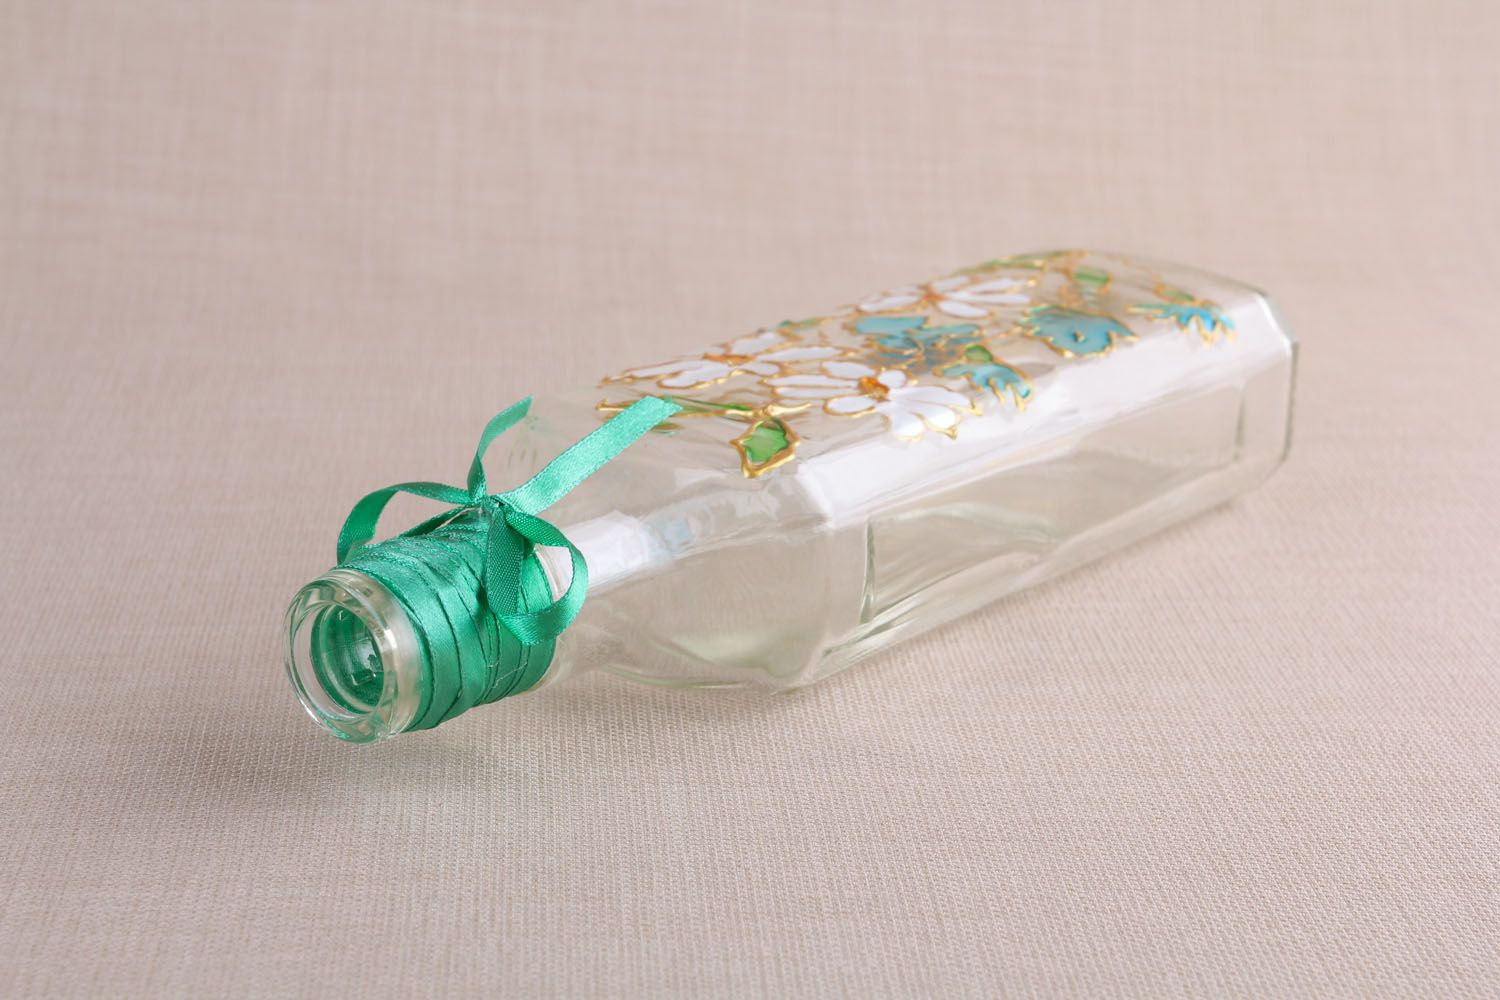 Homemade glass bottle with a lid photo 3